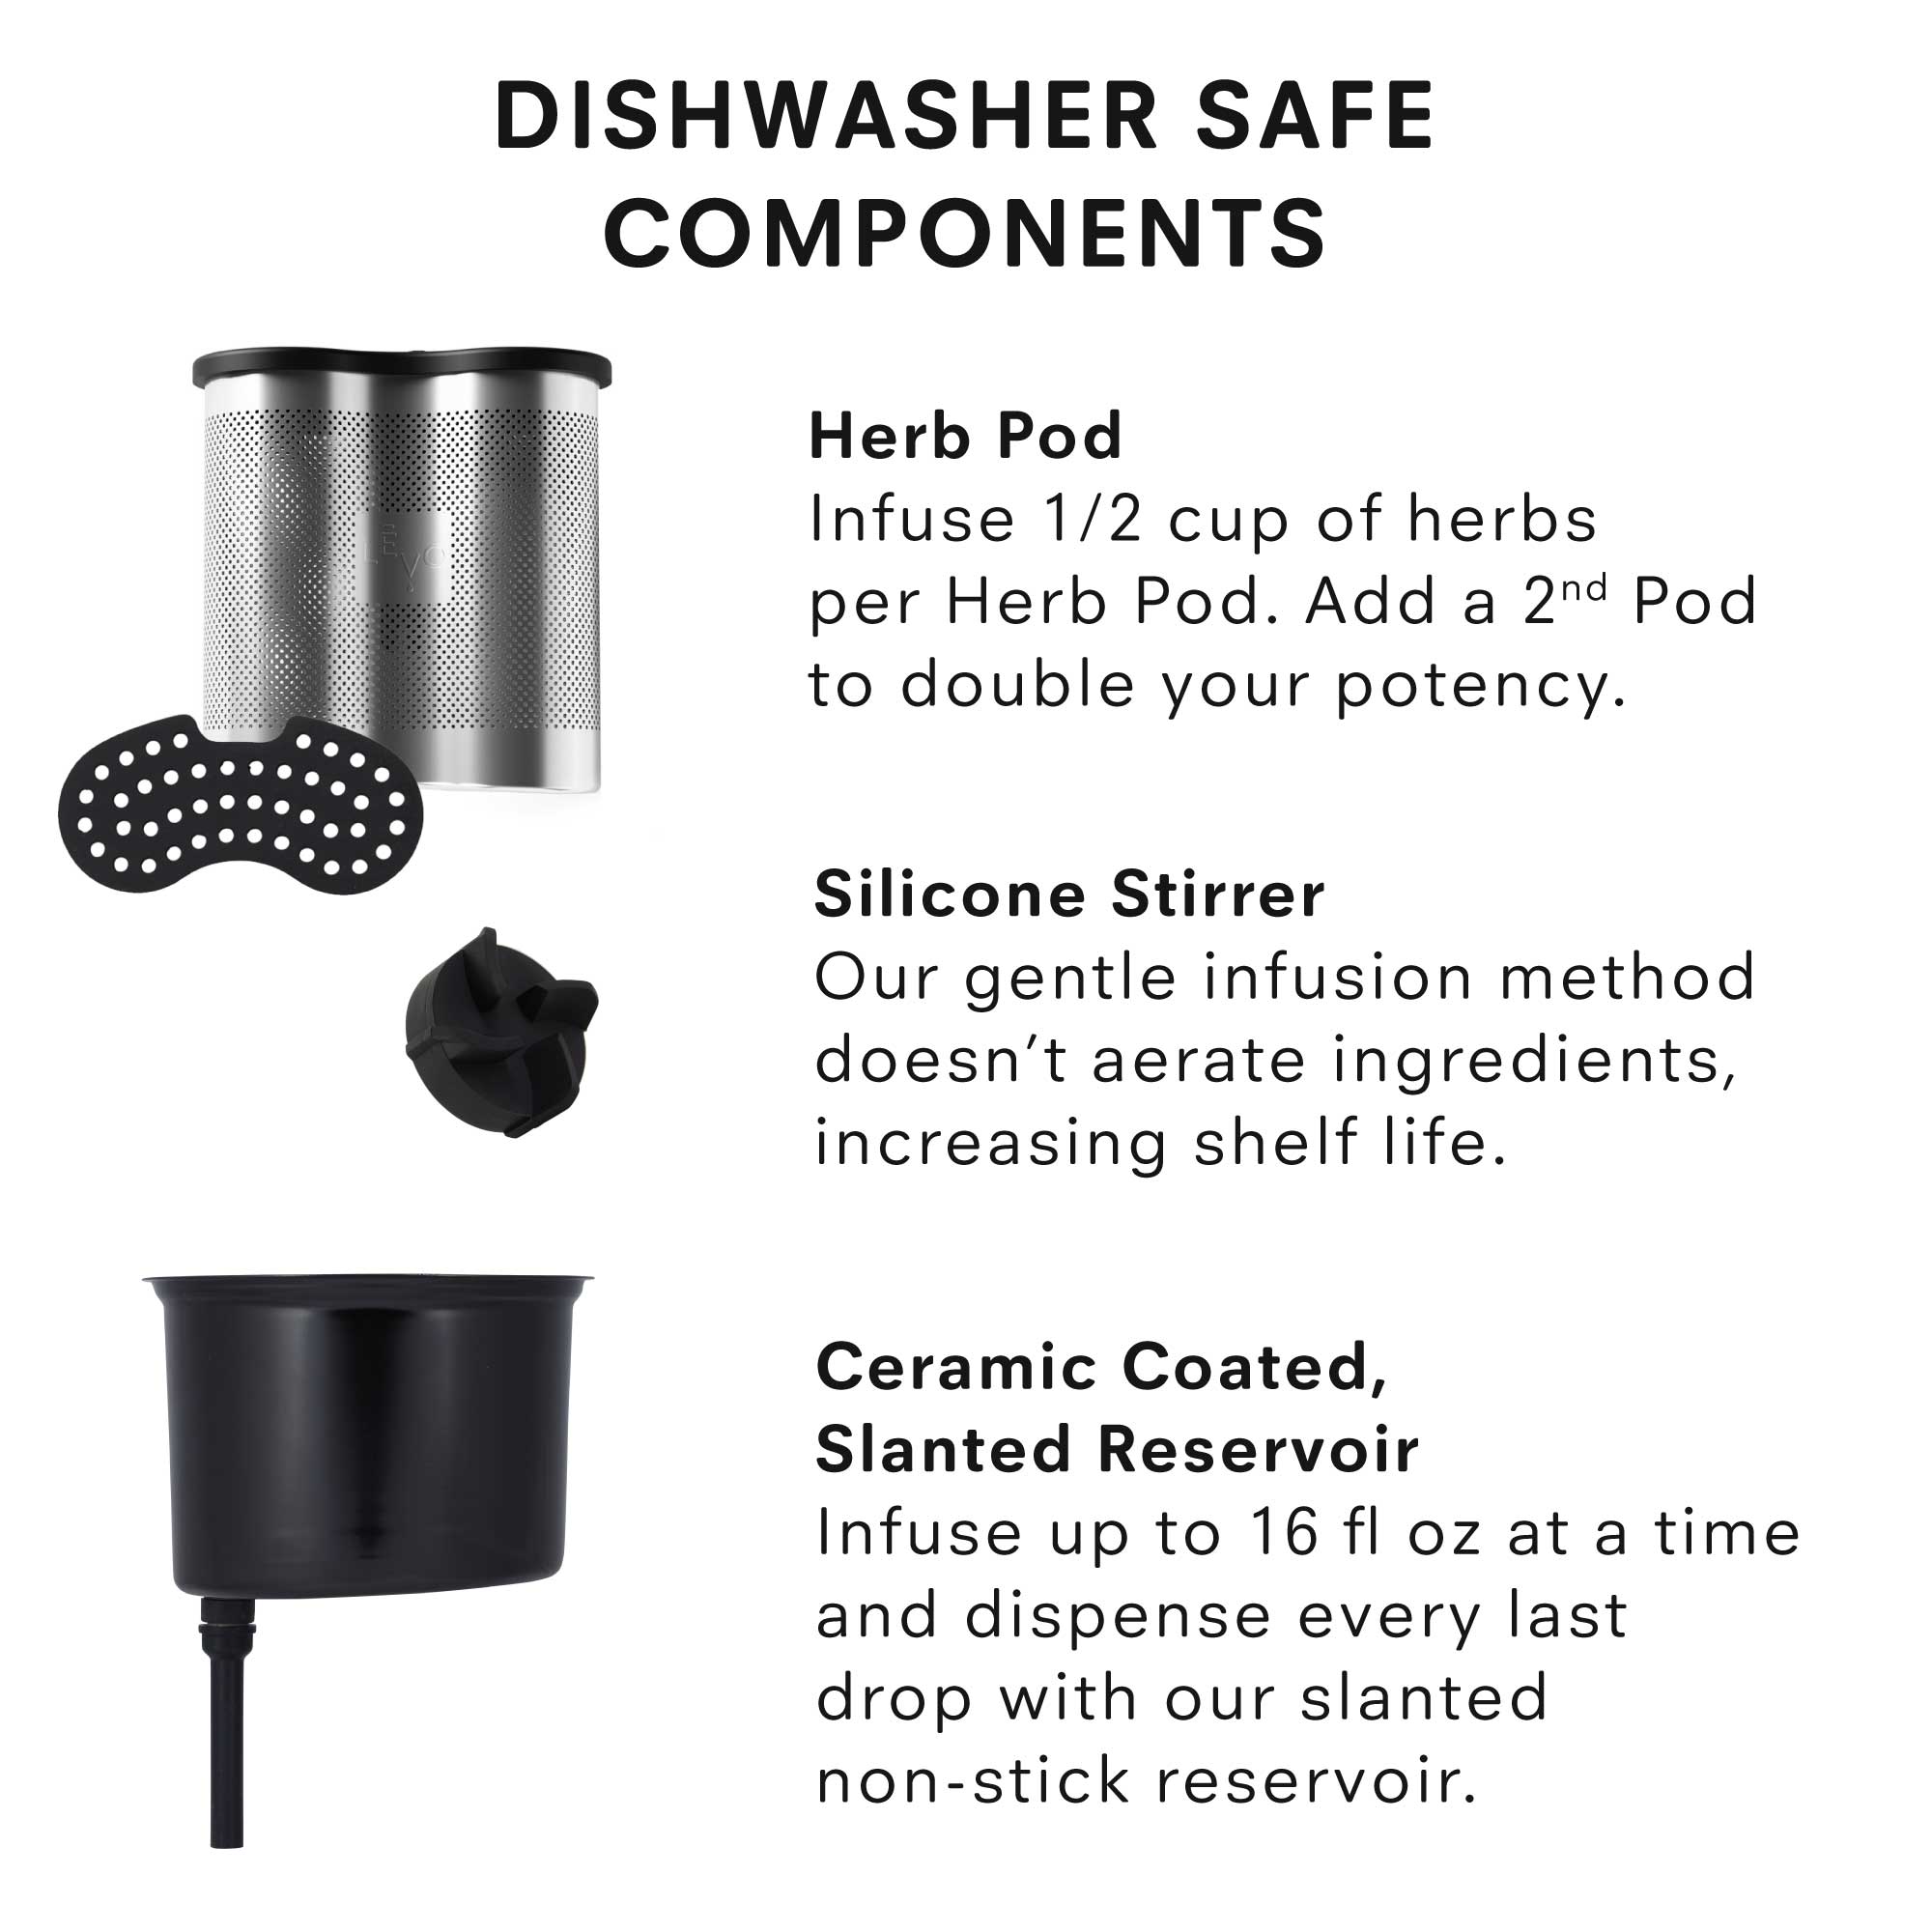 Dishwasher safe components! The LEVO II herb pod and lid, silicone stirrer, and ceramic coated reservoir can all go in the top rack of your dishwasher, making cleanup super simple